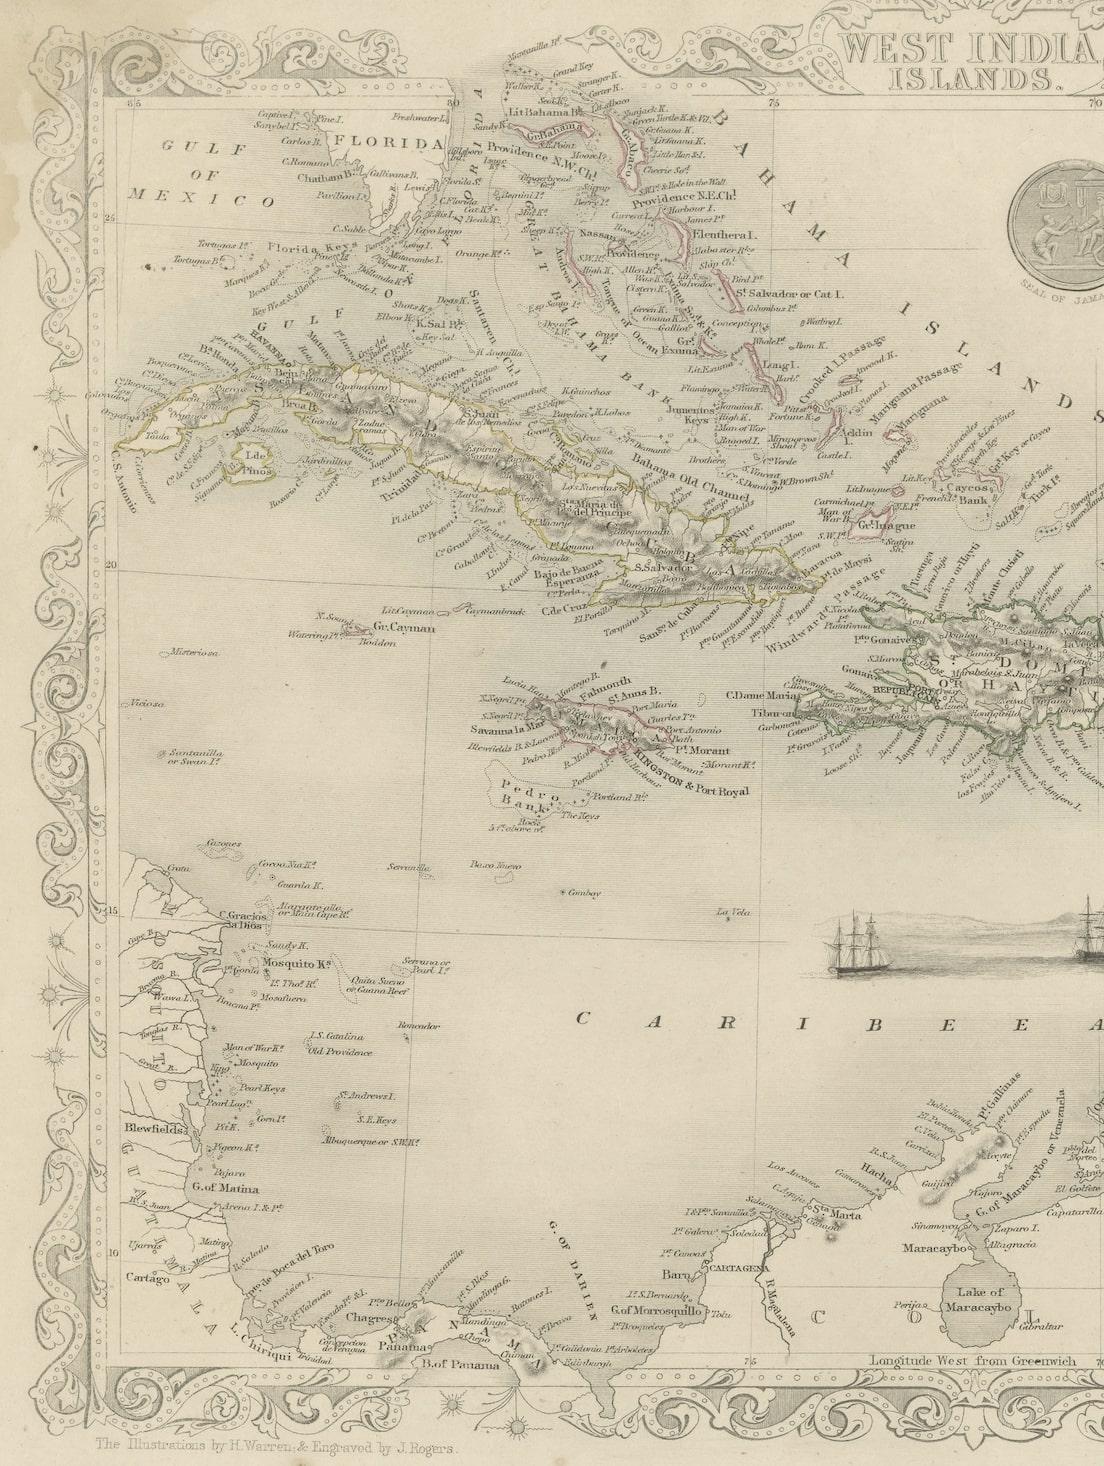 Paper  Engraving by Tallis and Rapkin of Map of the West Indies in The Caribbean, 1851 For Sale